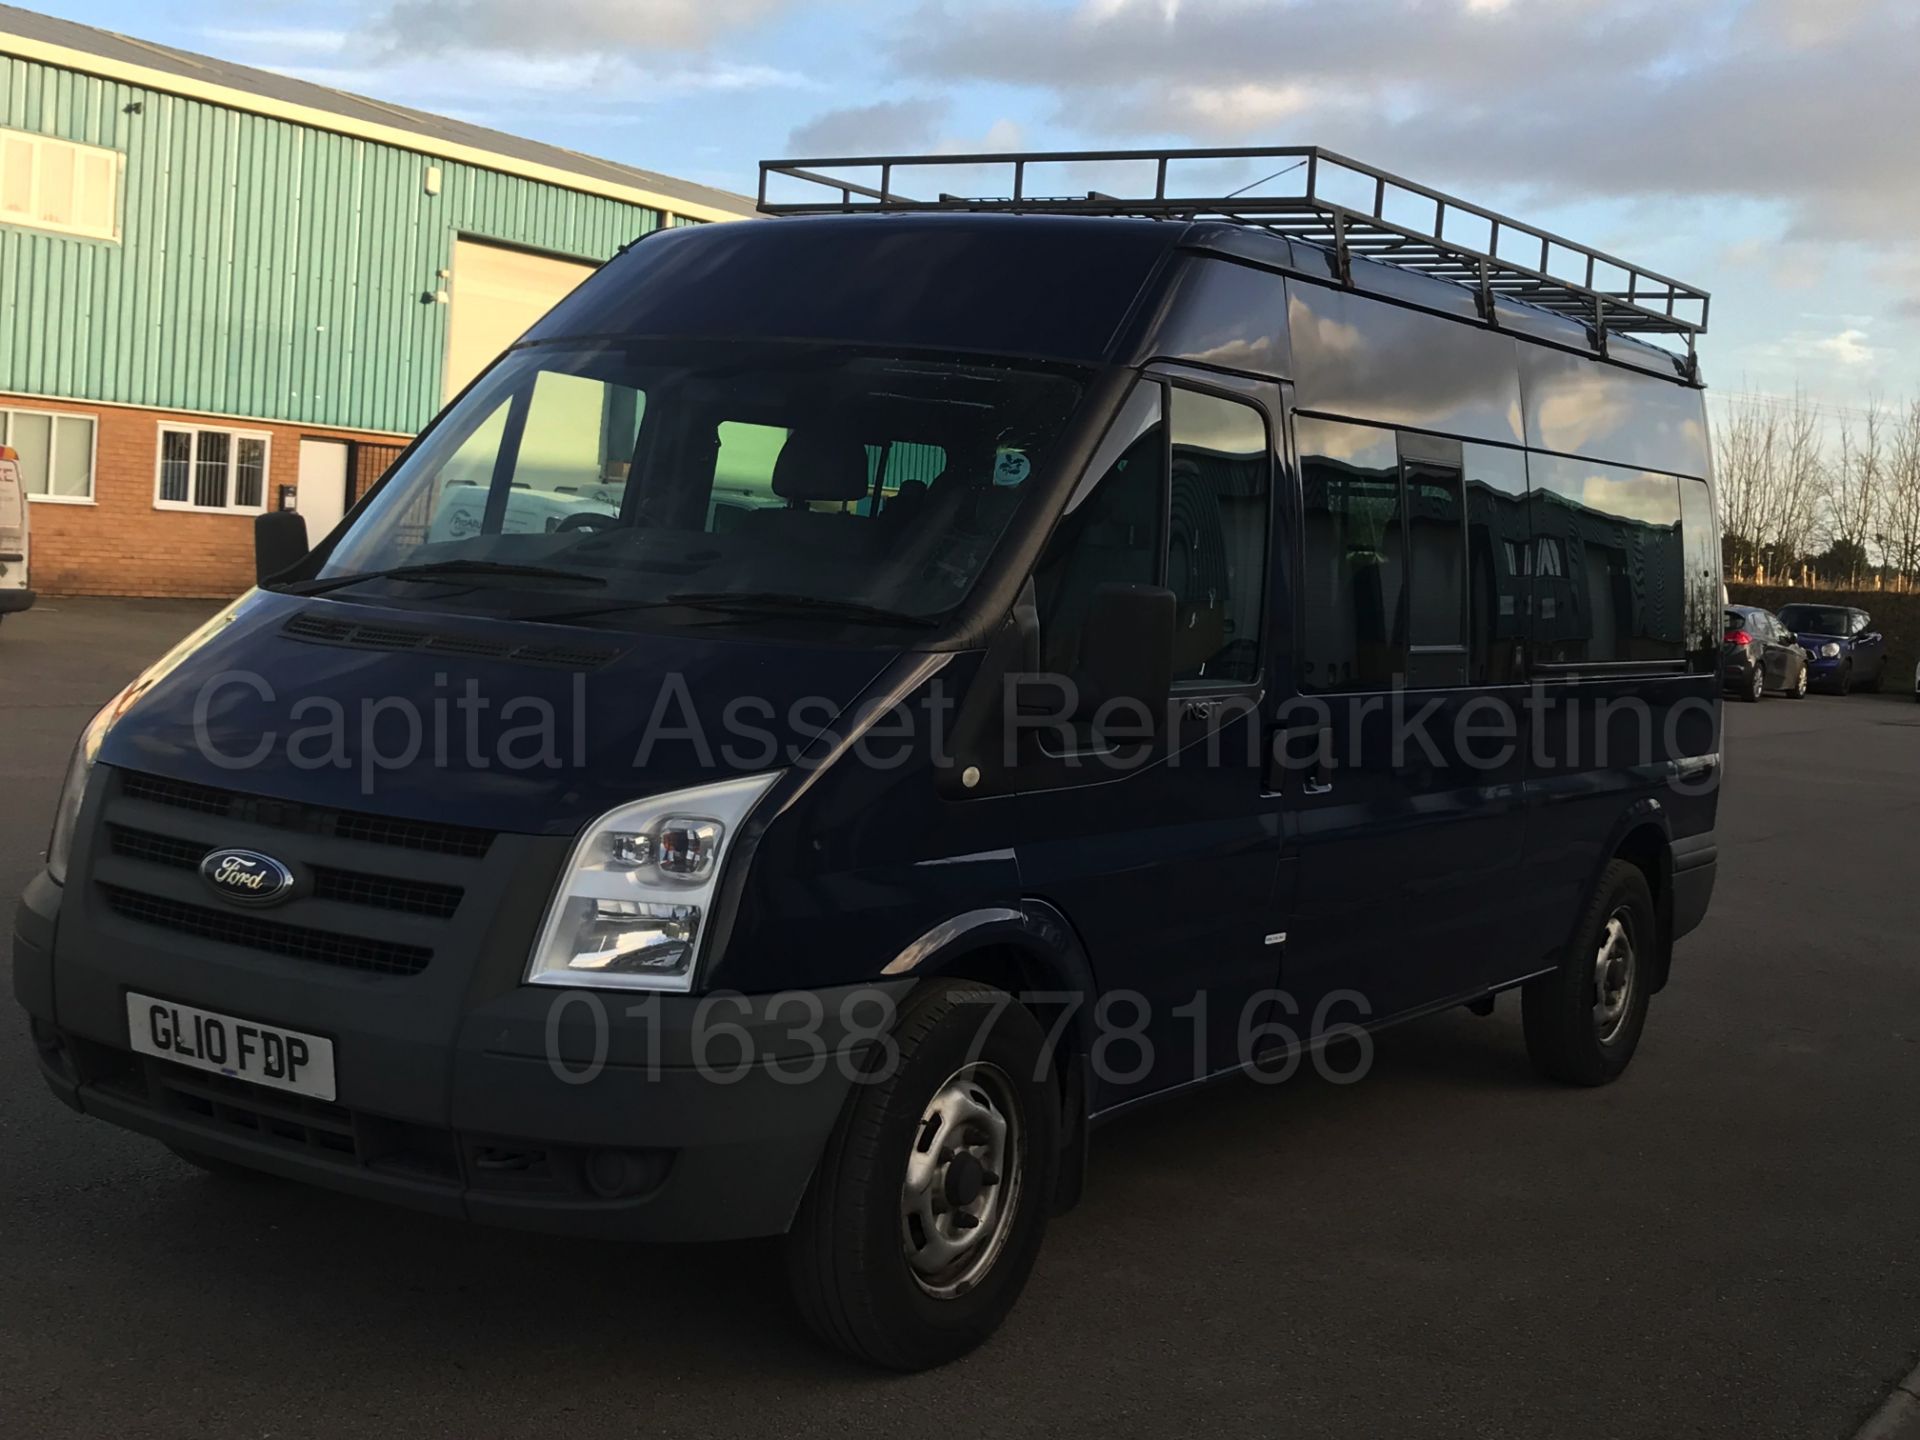 FORD TRANSIT 100 T350 '15 SEATER MINI-BUS' (2010 - 10 REG) '2.4 TDCI - 100 BHP - 5 SPEED' *AIR CON* - Image 5 of 28